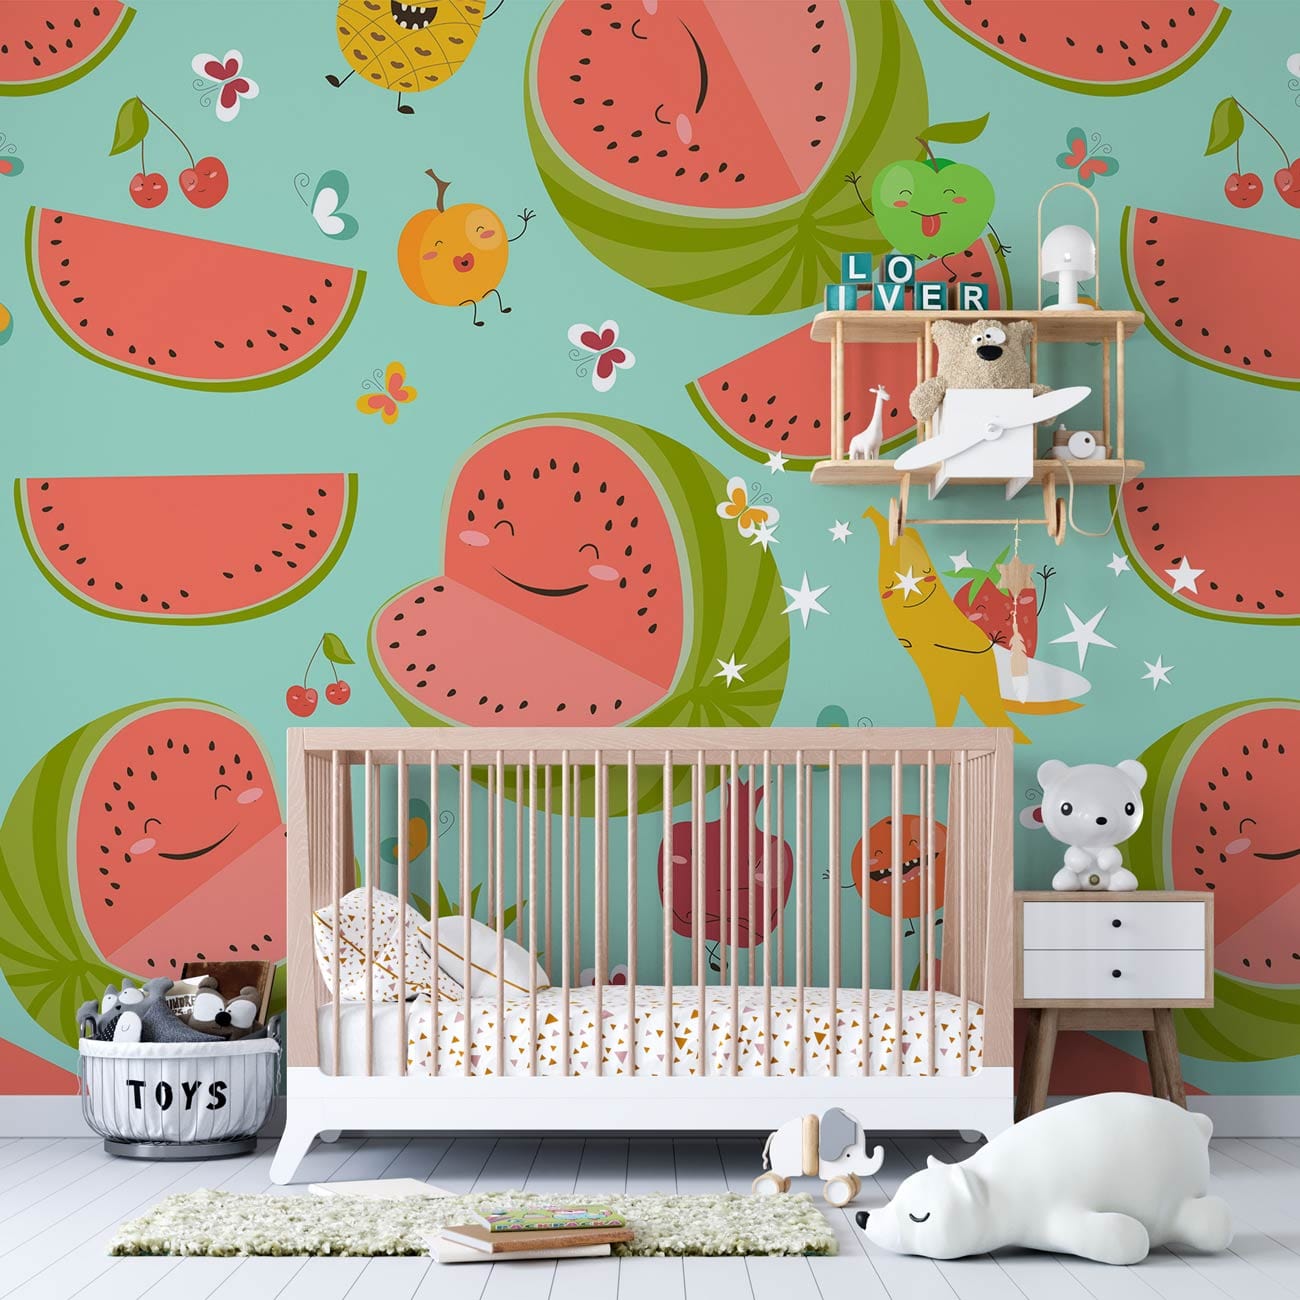 Wallpaper with a cartoon fruit design for the season of summer